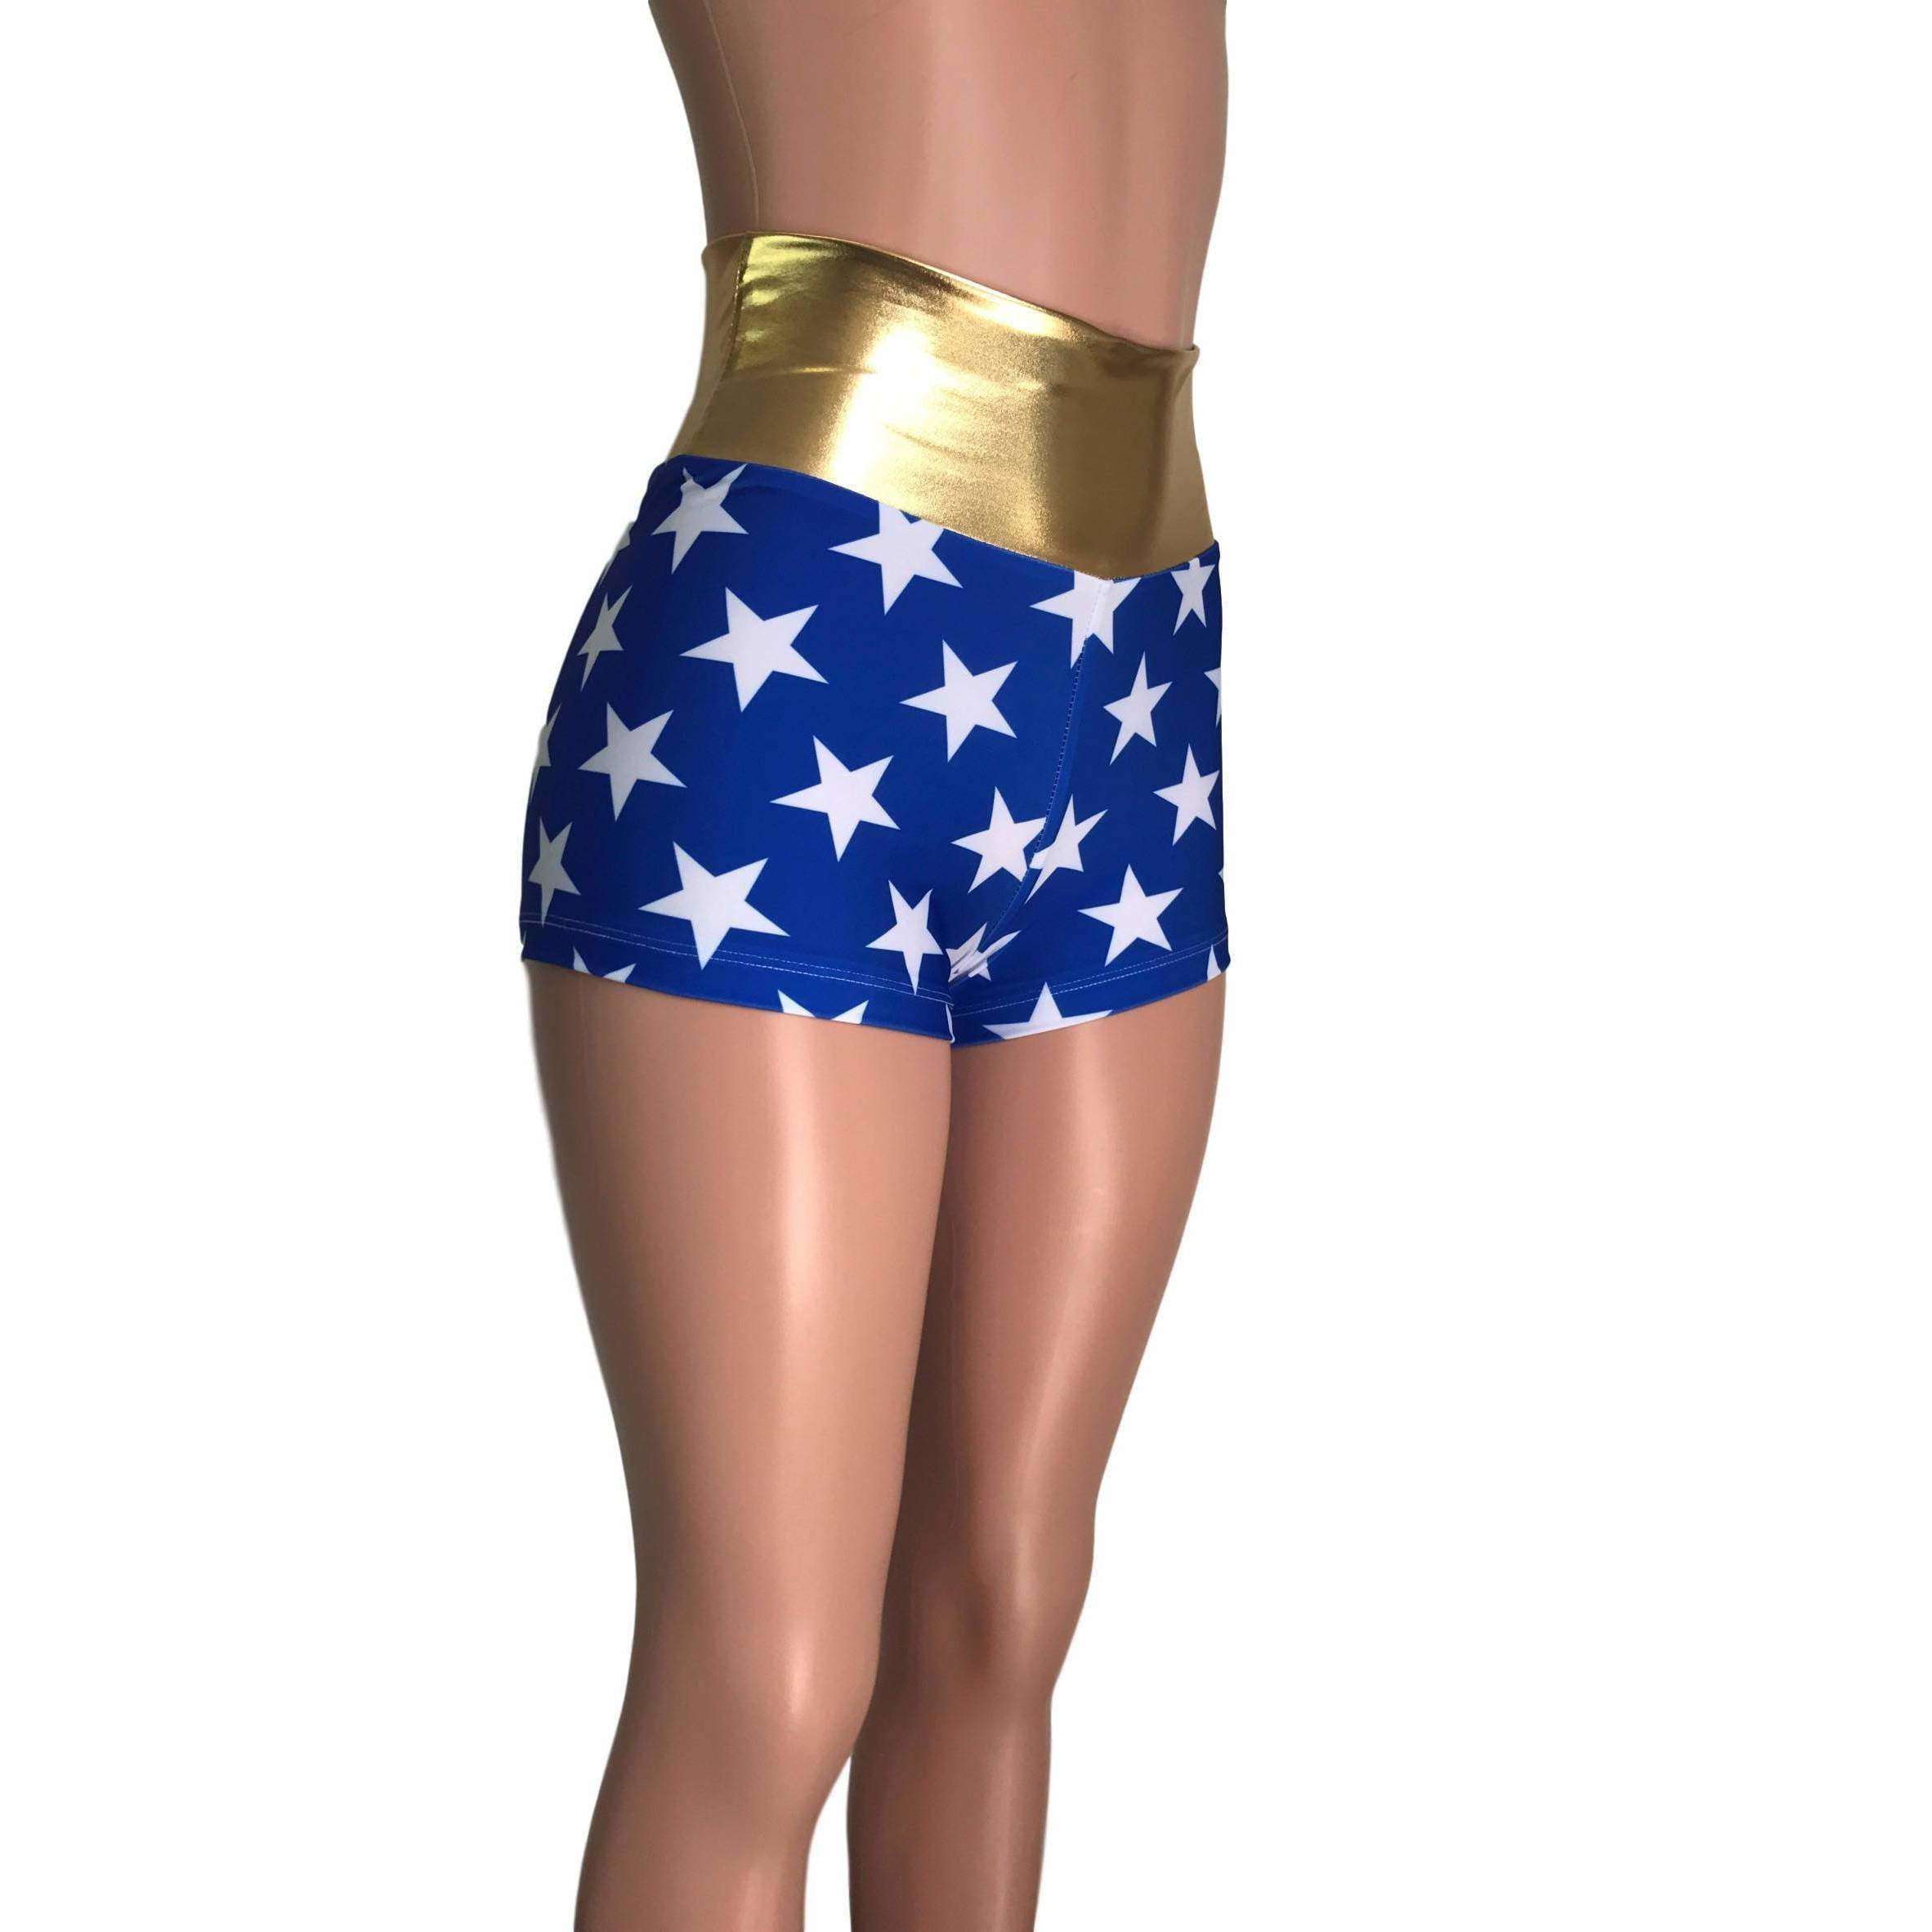 High Waisted Booty Shorts - Wonder Woman Inspired